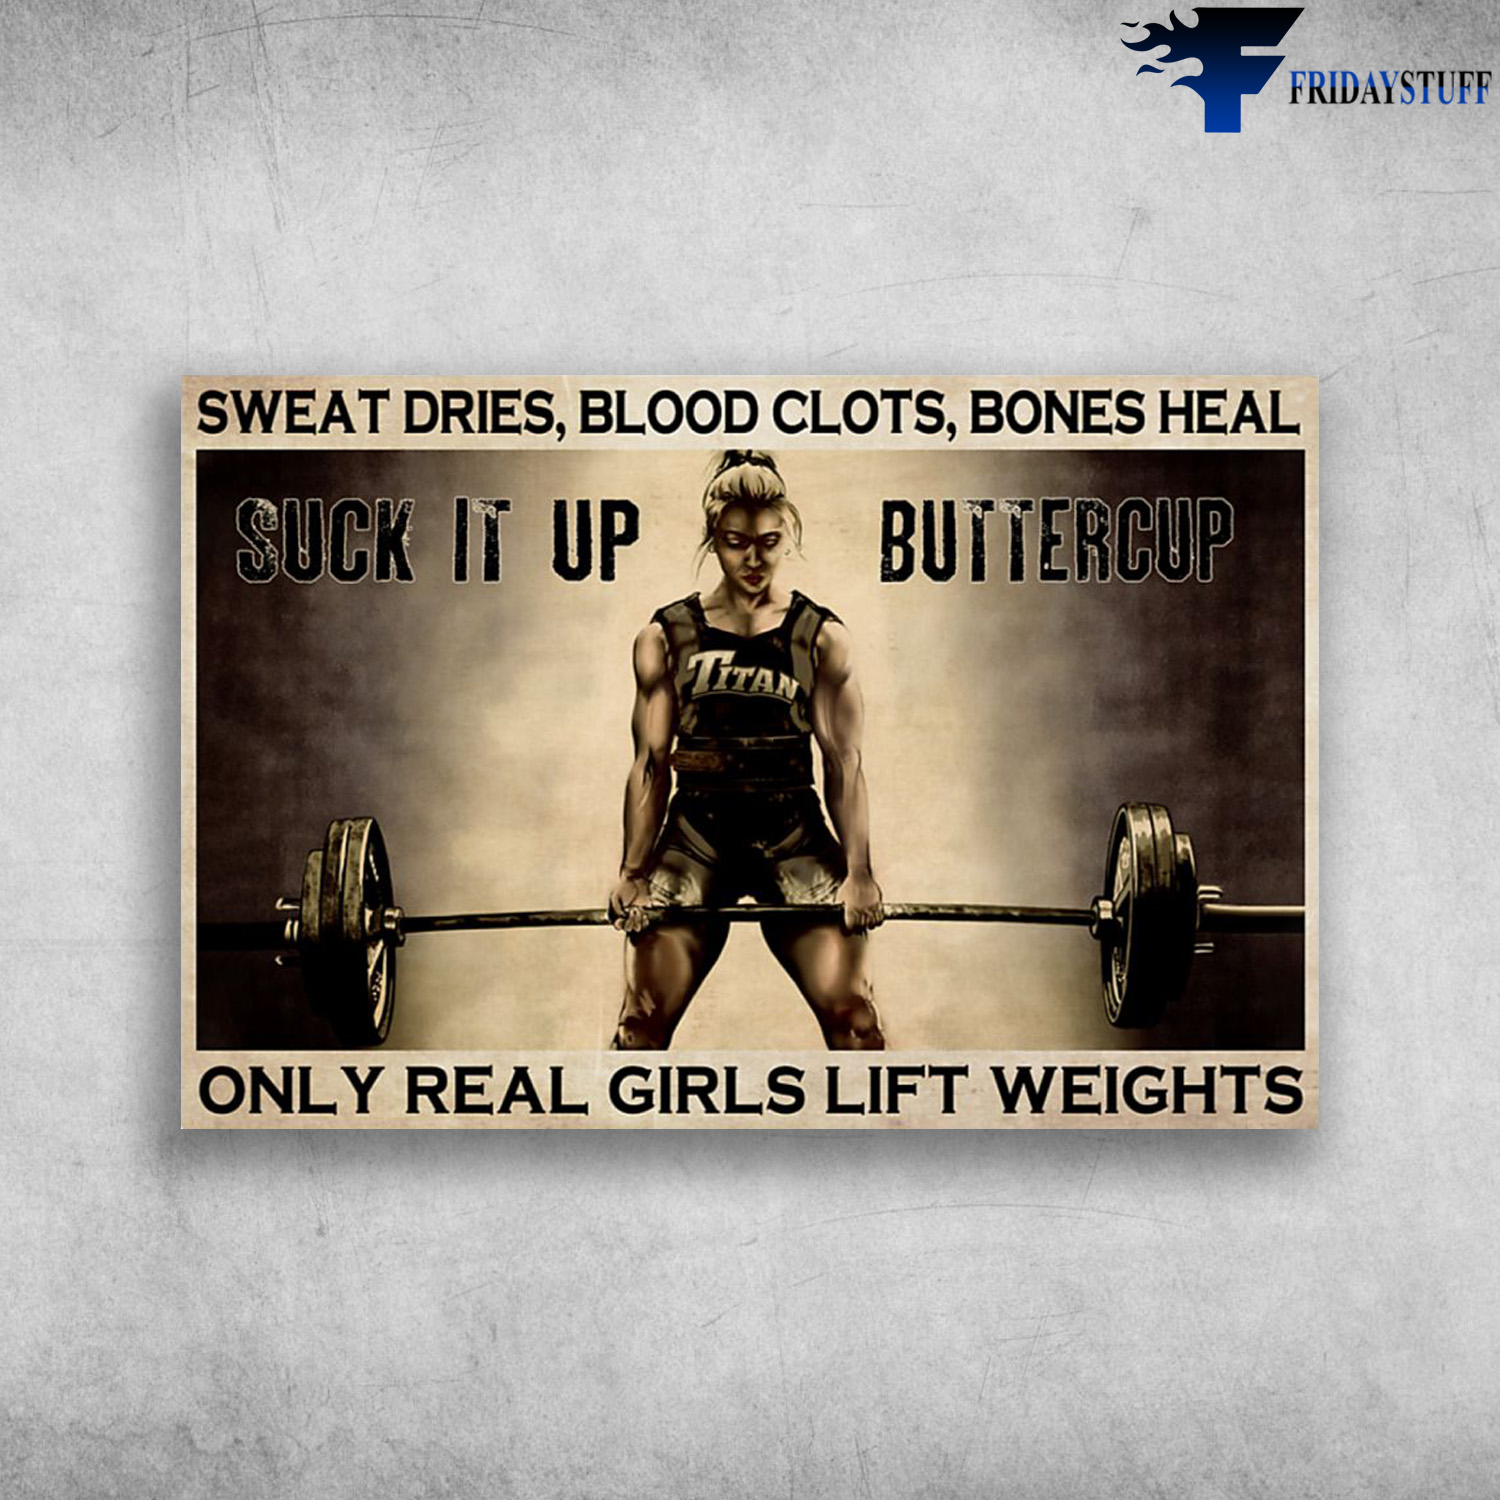 Girl Lift Weights - Sweat Dries, Blood Clots, Bones Heal, Only Real Girls Lift Weights, Suck It Up Buttercup